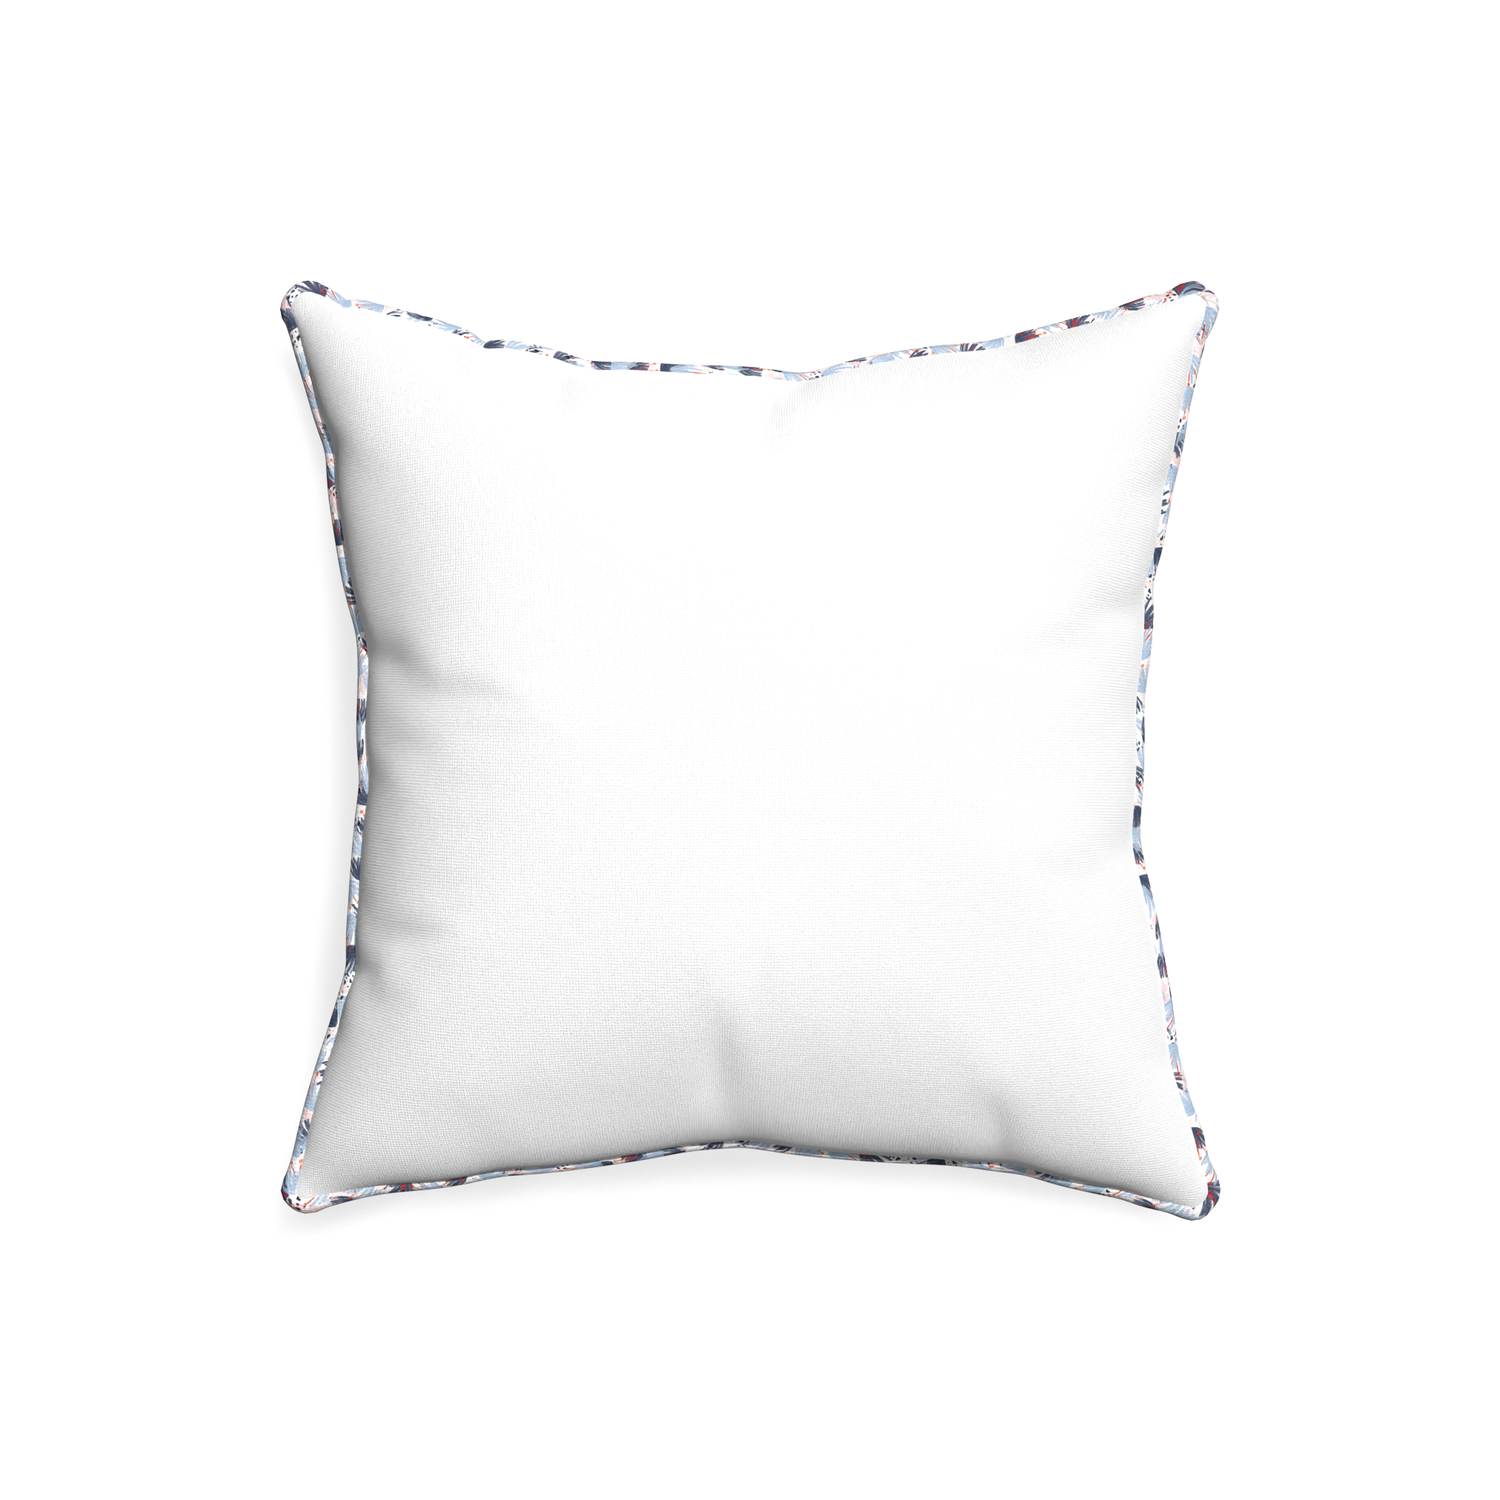 20-square snow custom white cottonpillow with e piping on white background